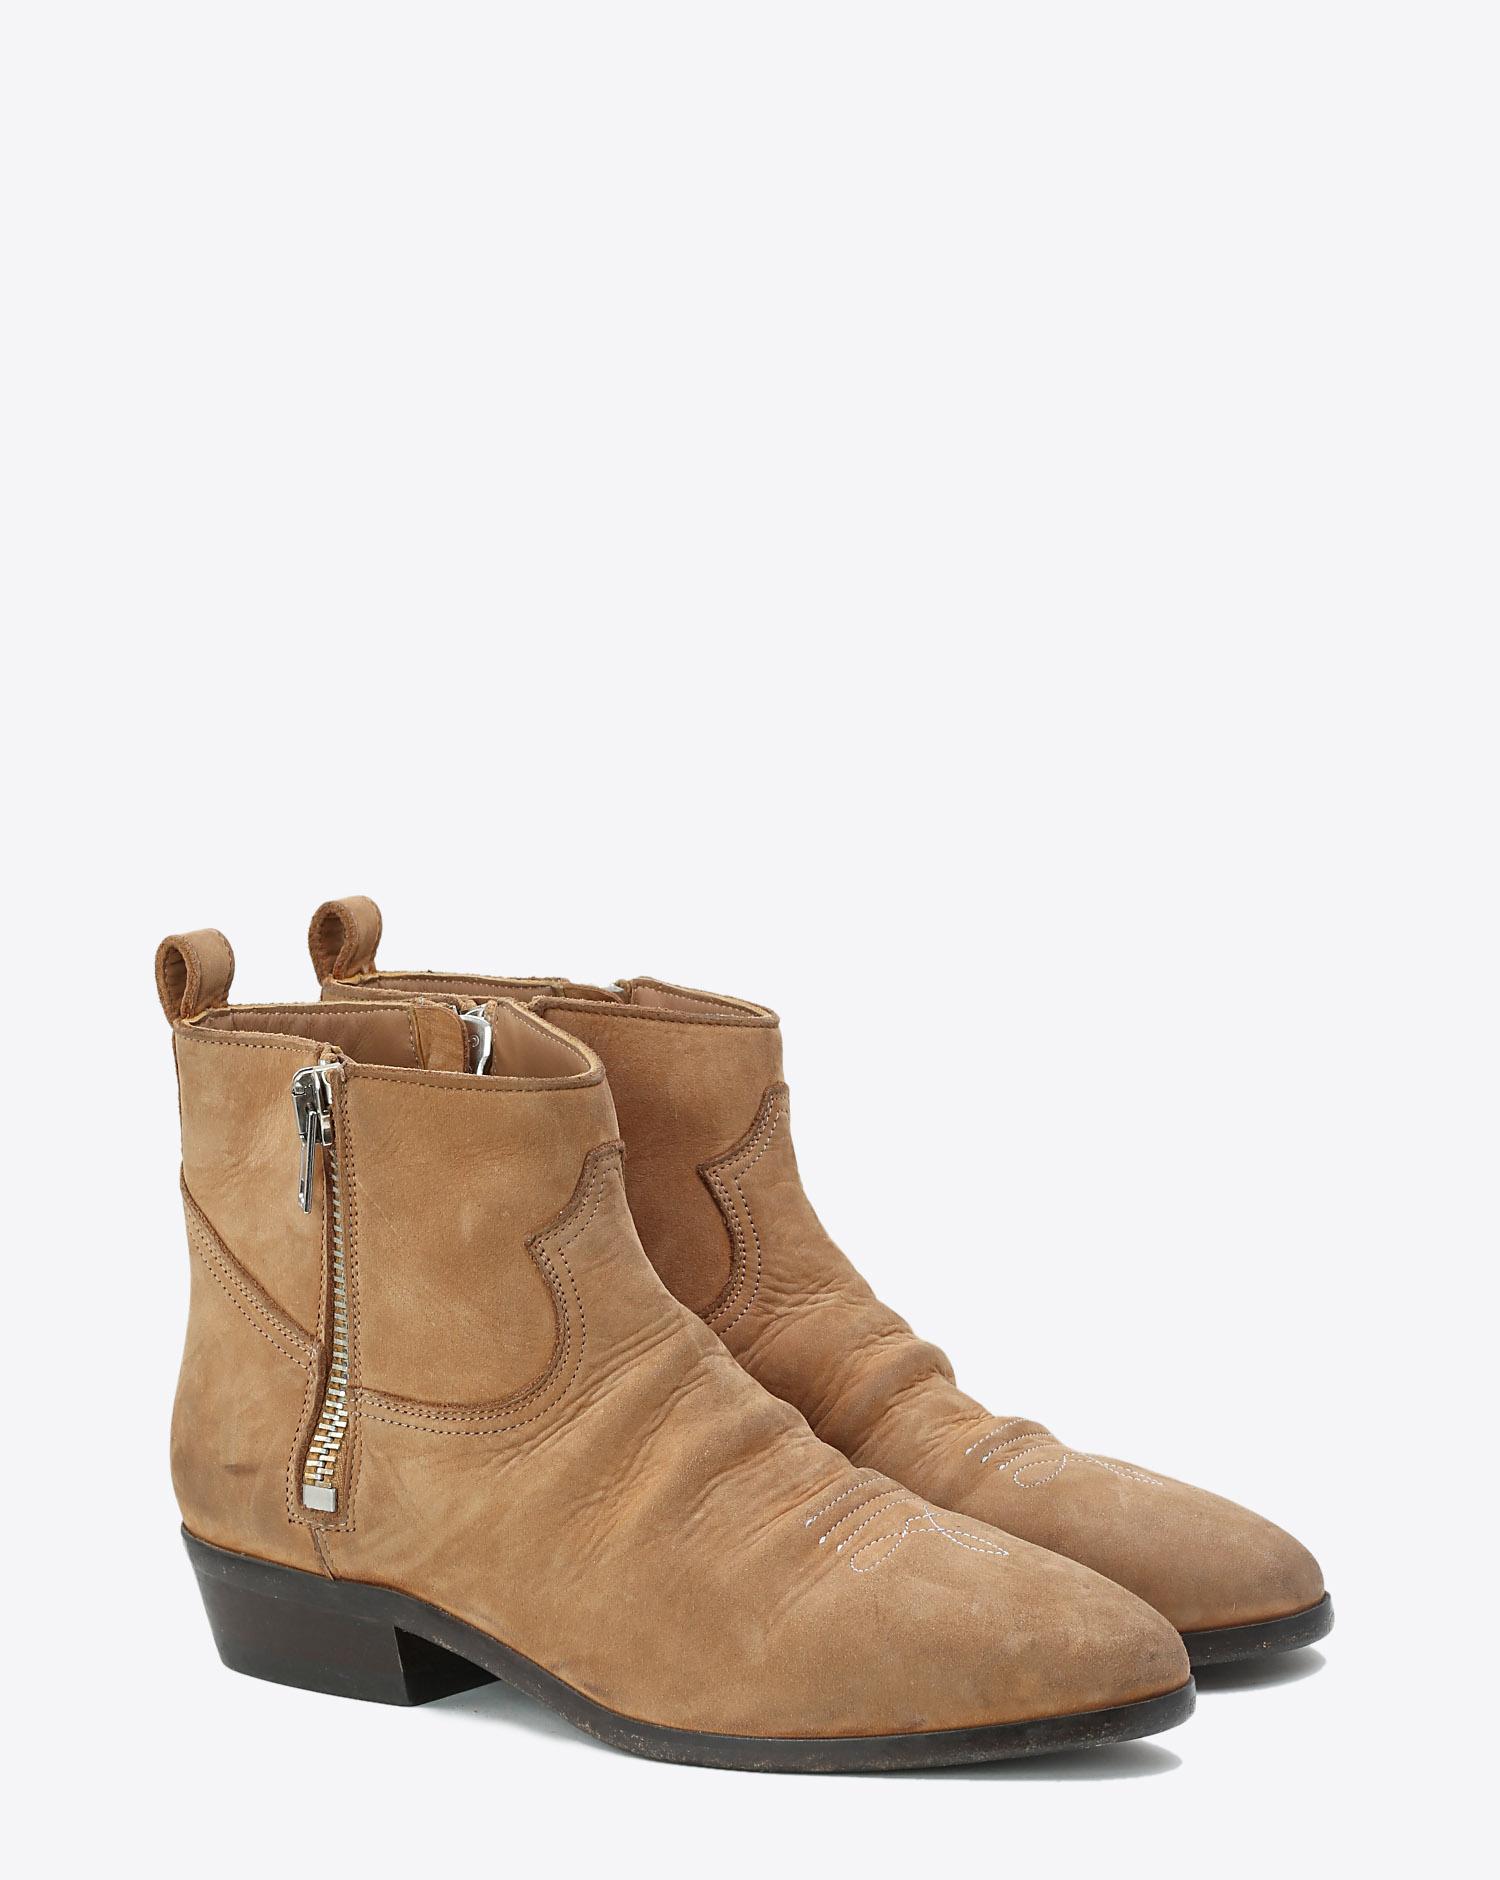 Golden Goose Woman Chaussures Collection Boots Viand - Whisky Leather  